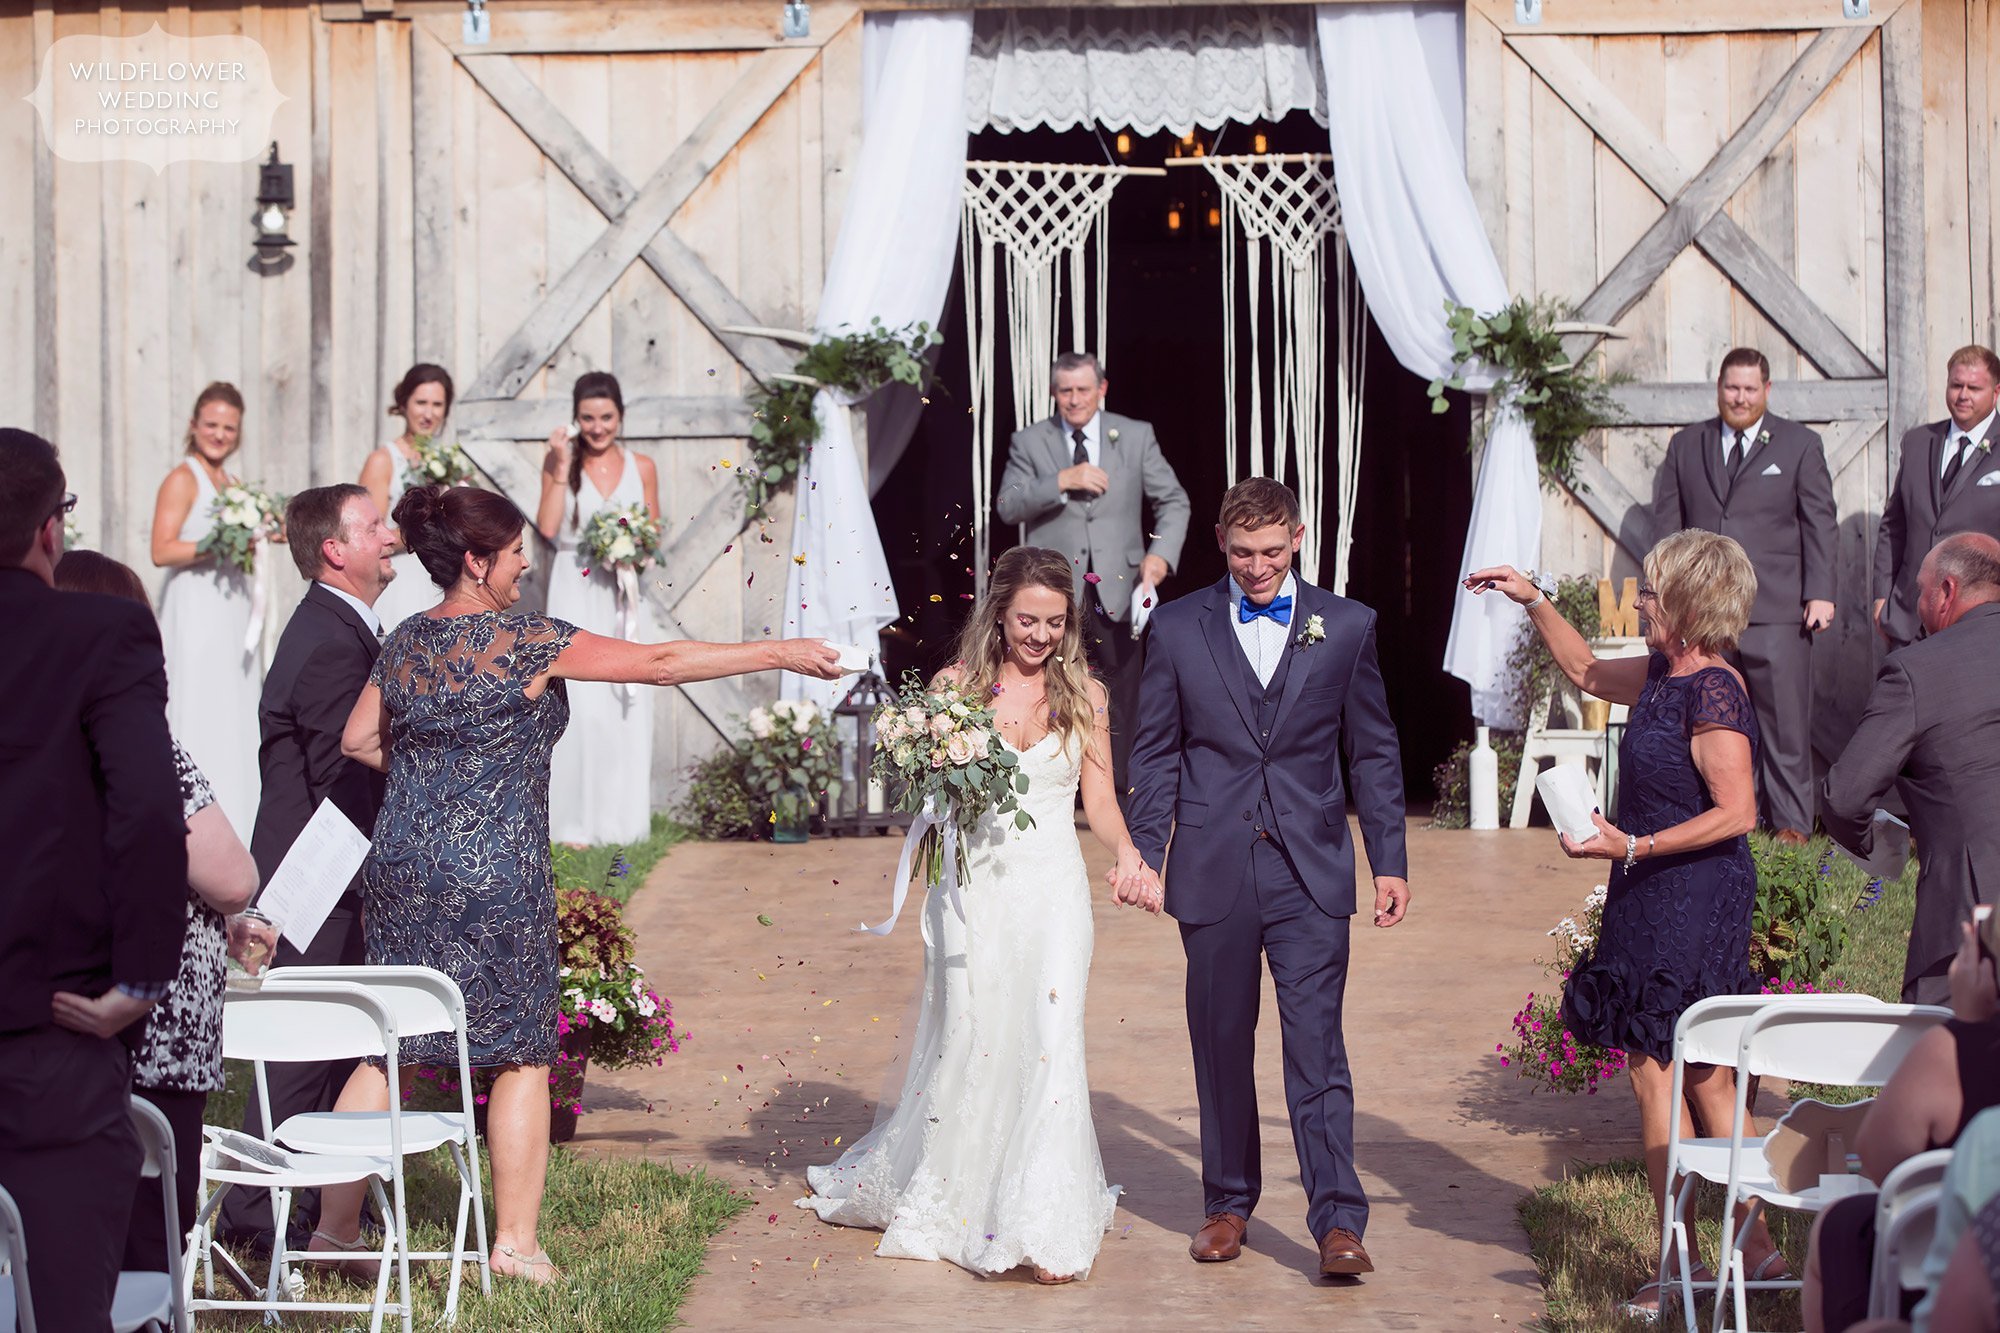 The bride and groom have a colorful wedding ceremony exit walk as the guests throw dried wildflower petals at them at this barn wedding.